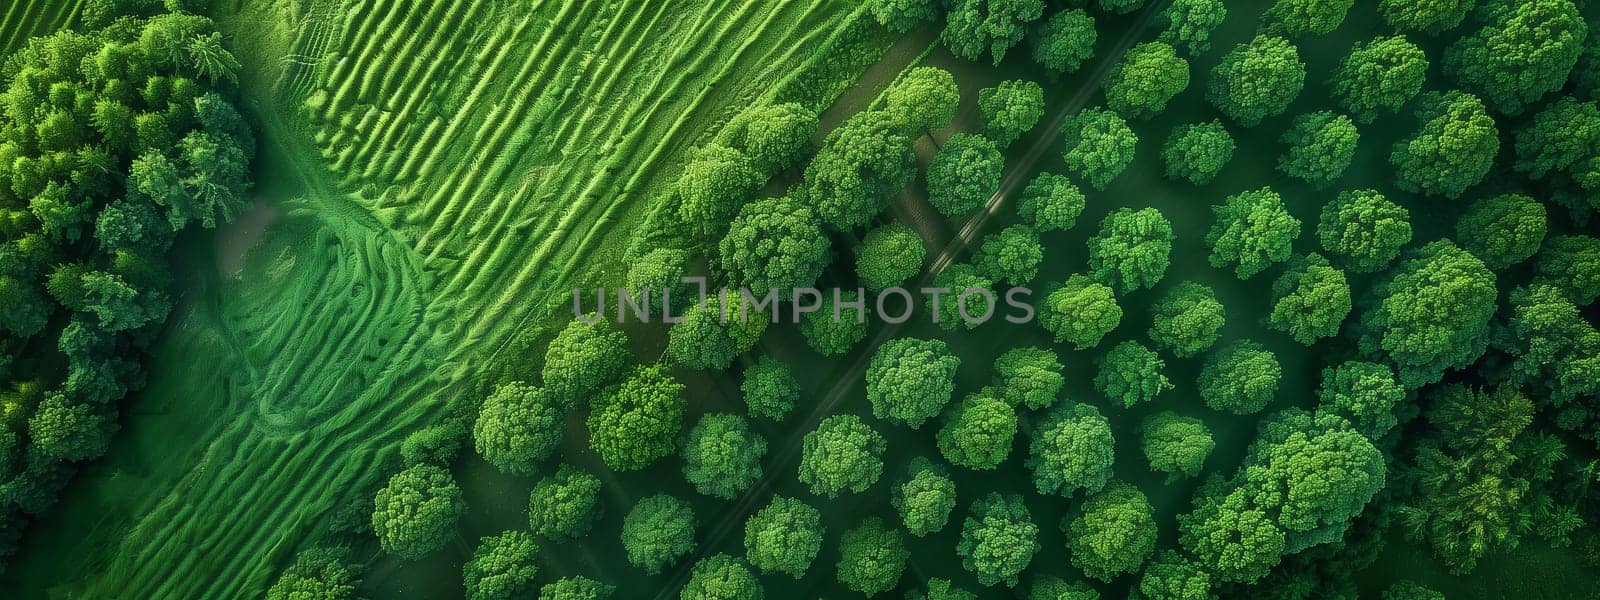 A stunning aerial view of a vibrant forest and green fields showcasing the natural beauty of terrestrial plants, grass, leaf vegetables, and flowering plants with a symmetrical pattern